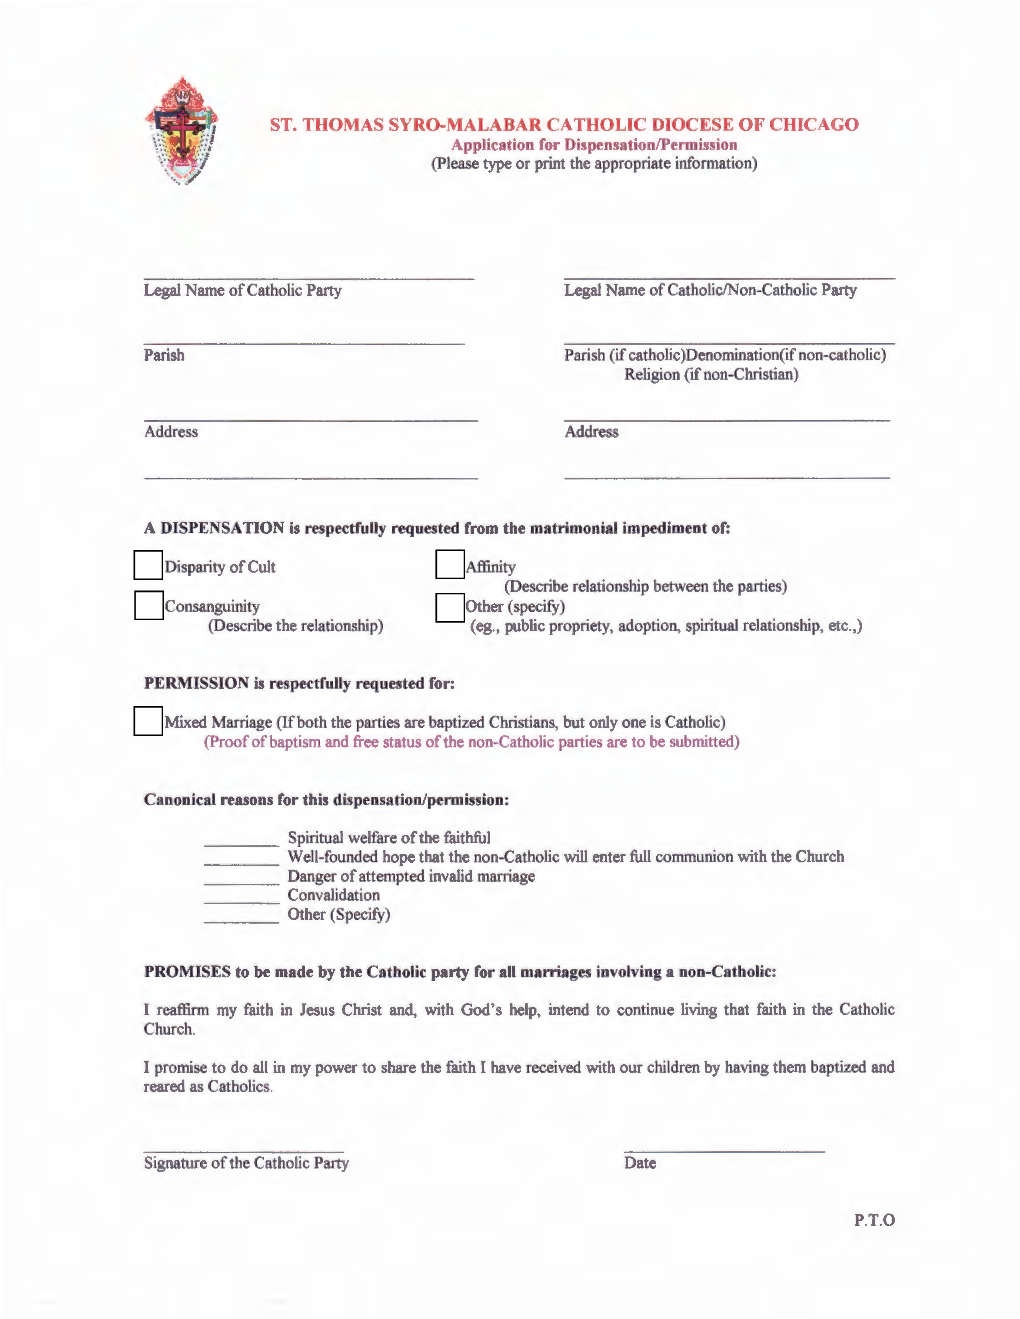 ST. THOMAS SYRO-MALABAR CATHOLIC DIOCESE of CHICAGO Application for Dispensation/Permission (Please Type Or Print the Appropriate Information)